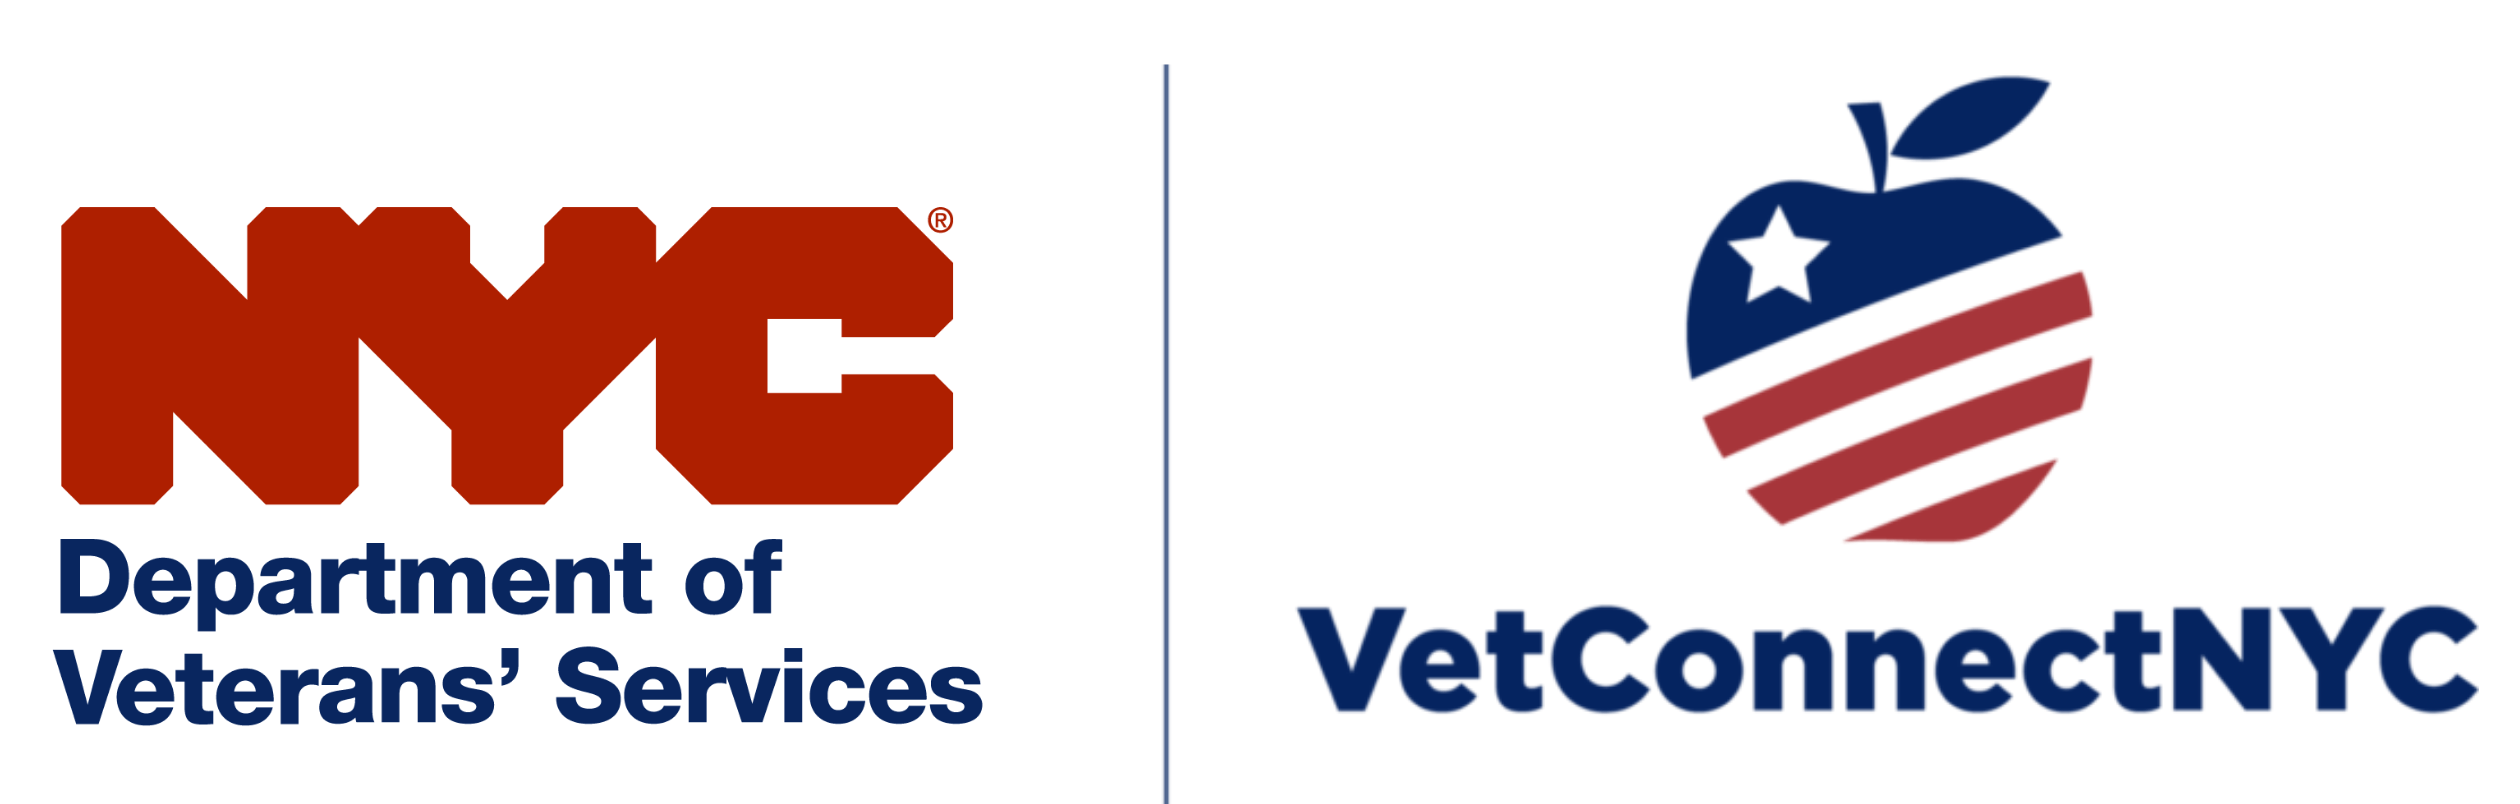 Vet Connect NYC and Department of Veterans' Services